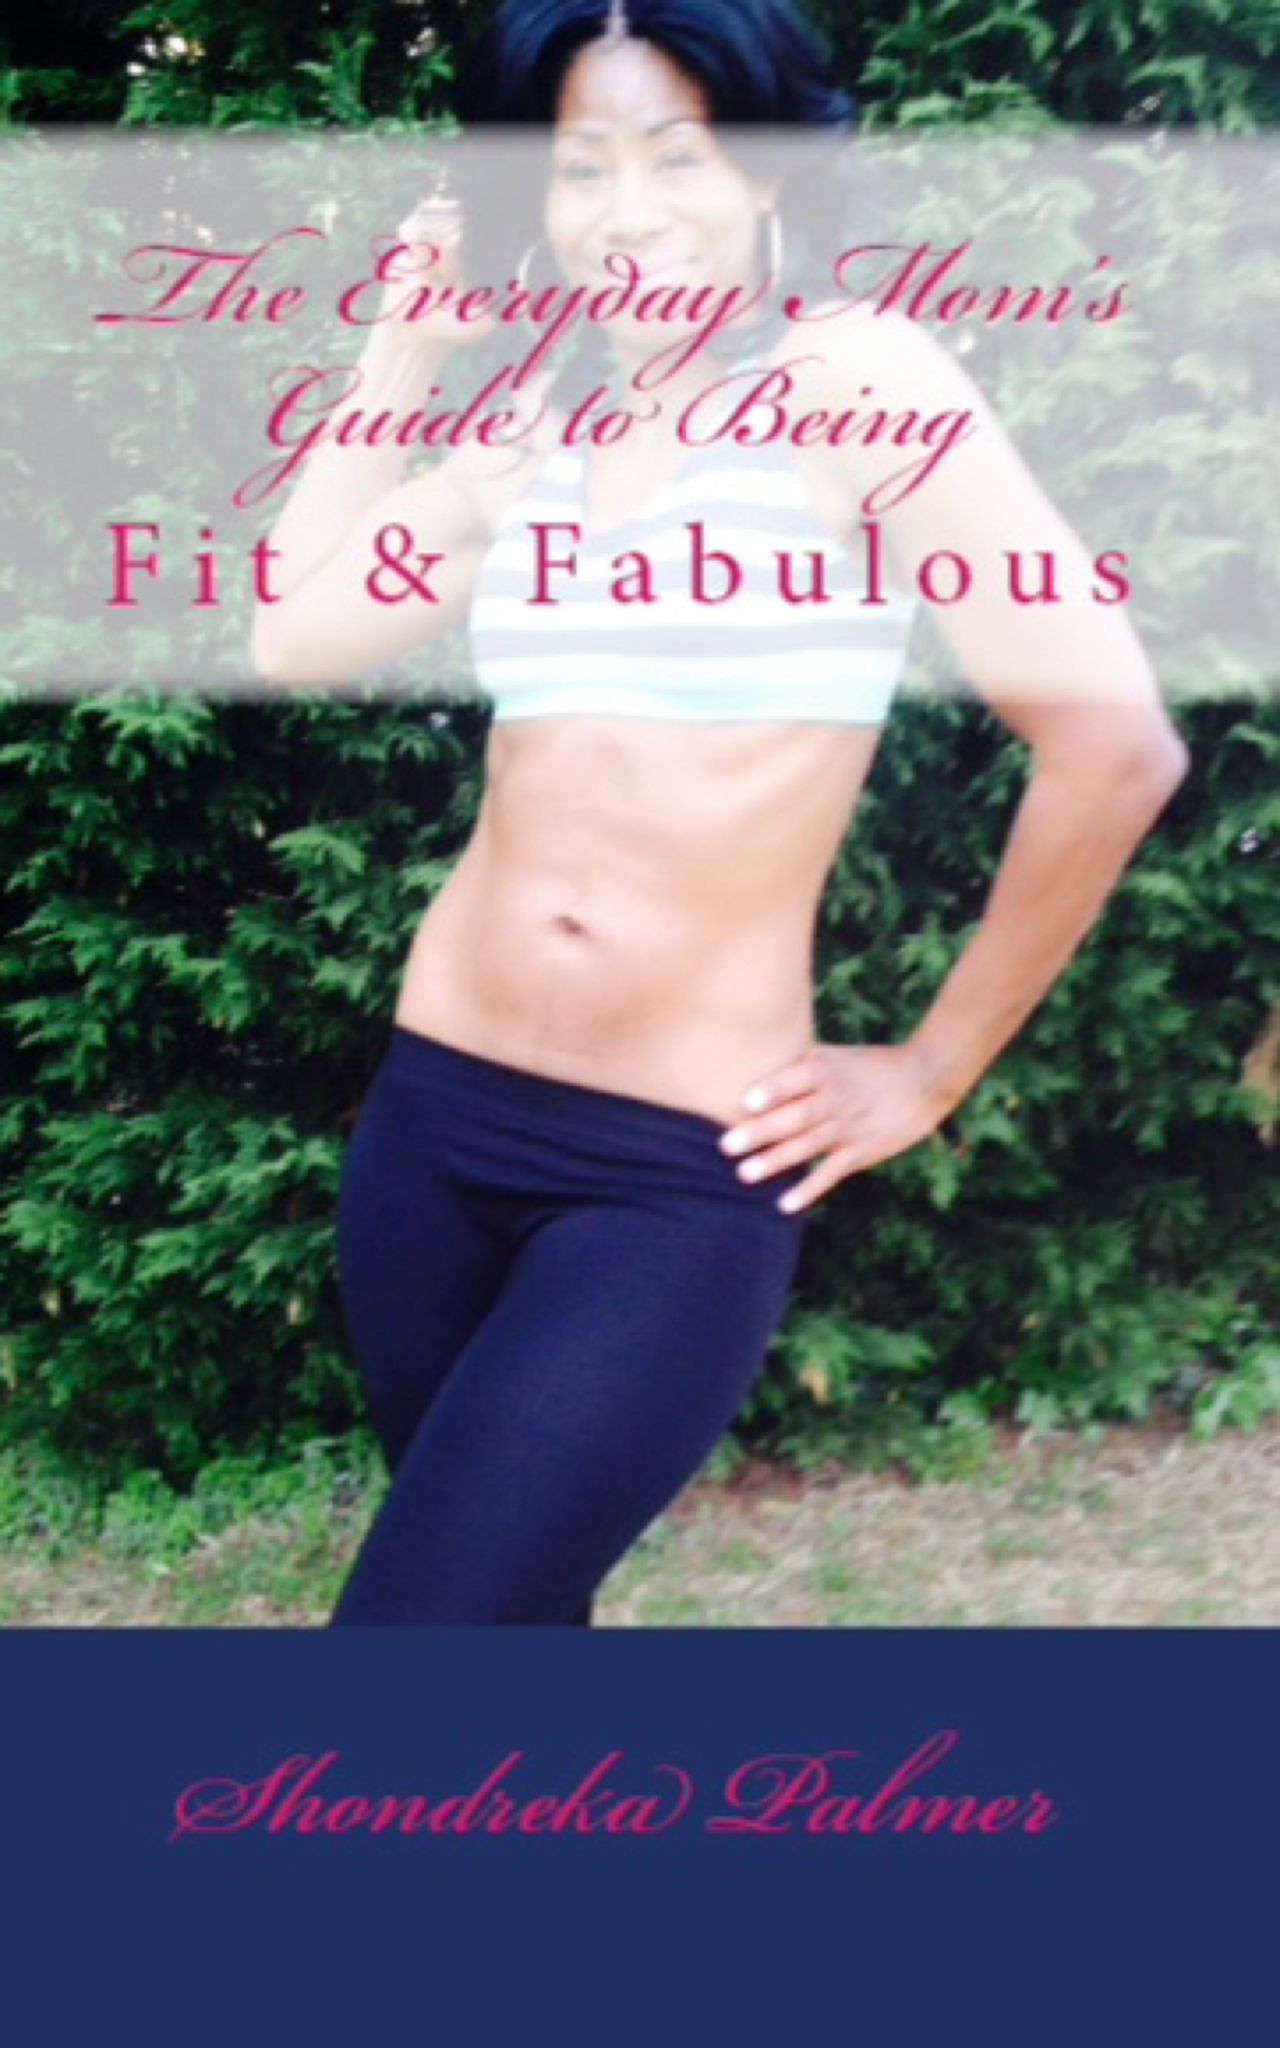 FREE: The Everyday Mom’s Guide to Being Fit & Fabulous by Shondreka Palmer